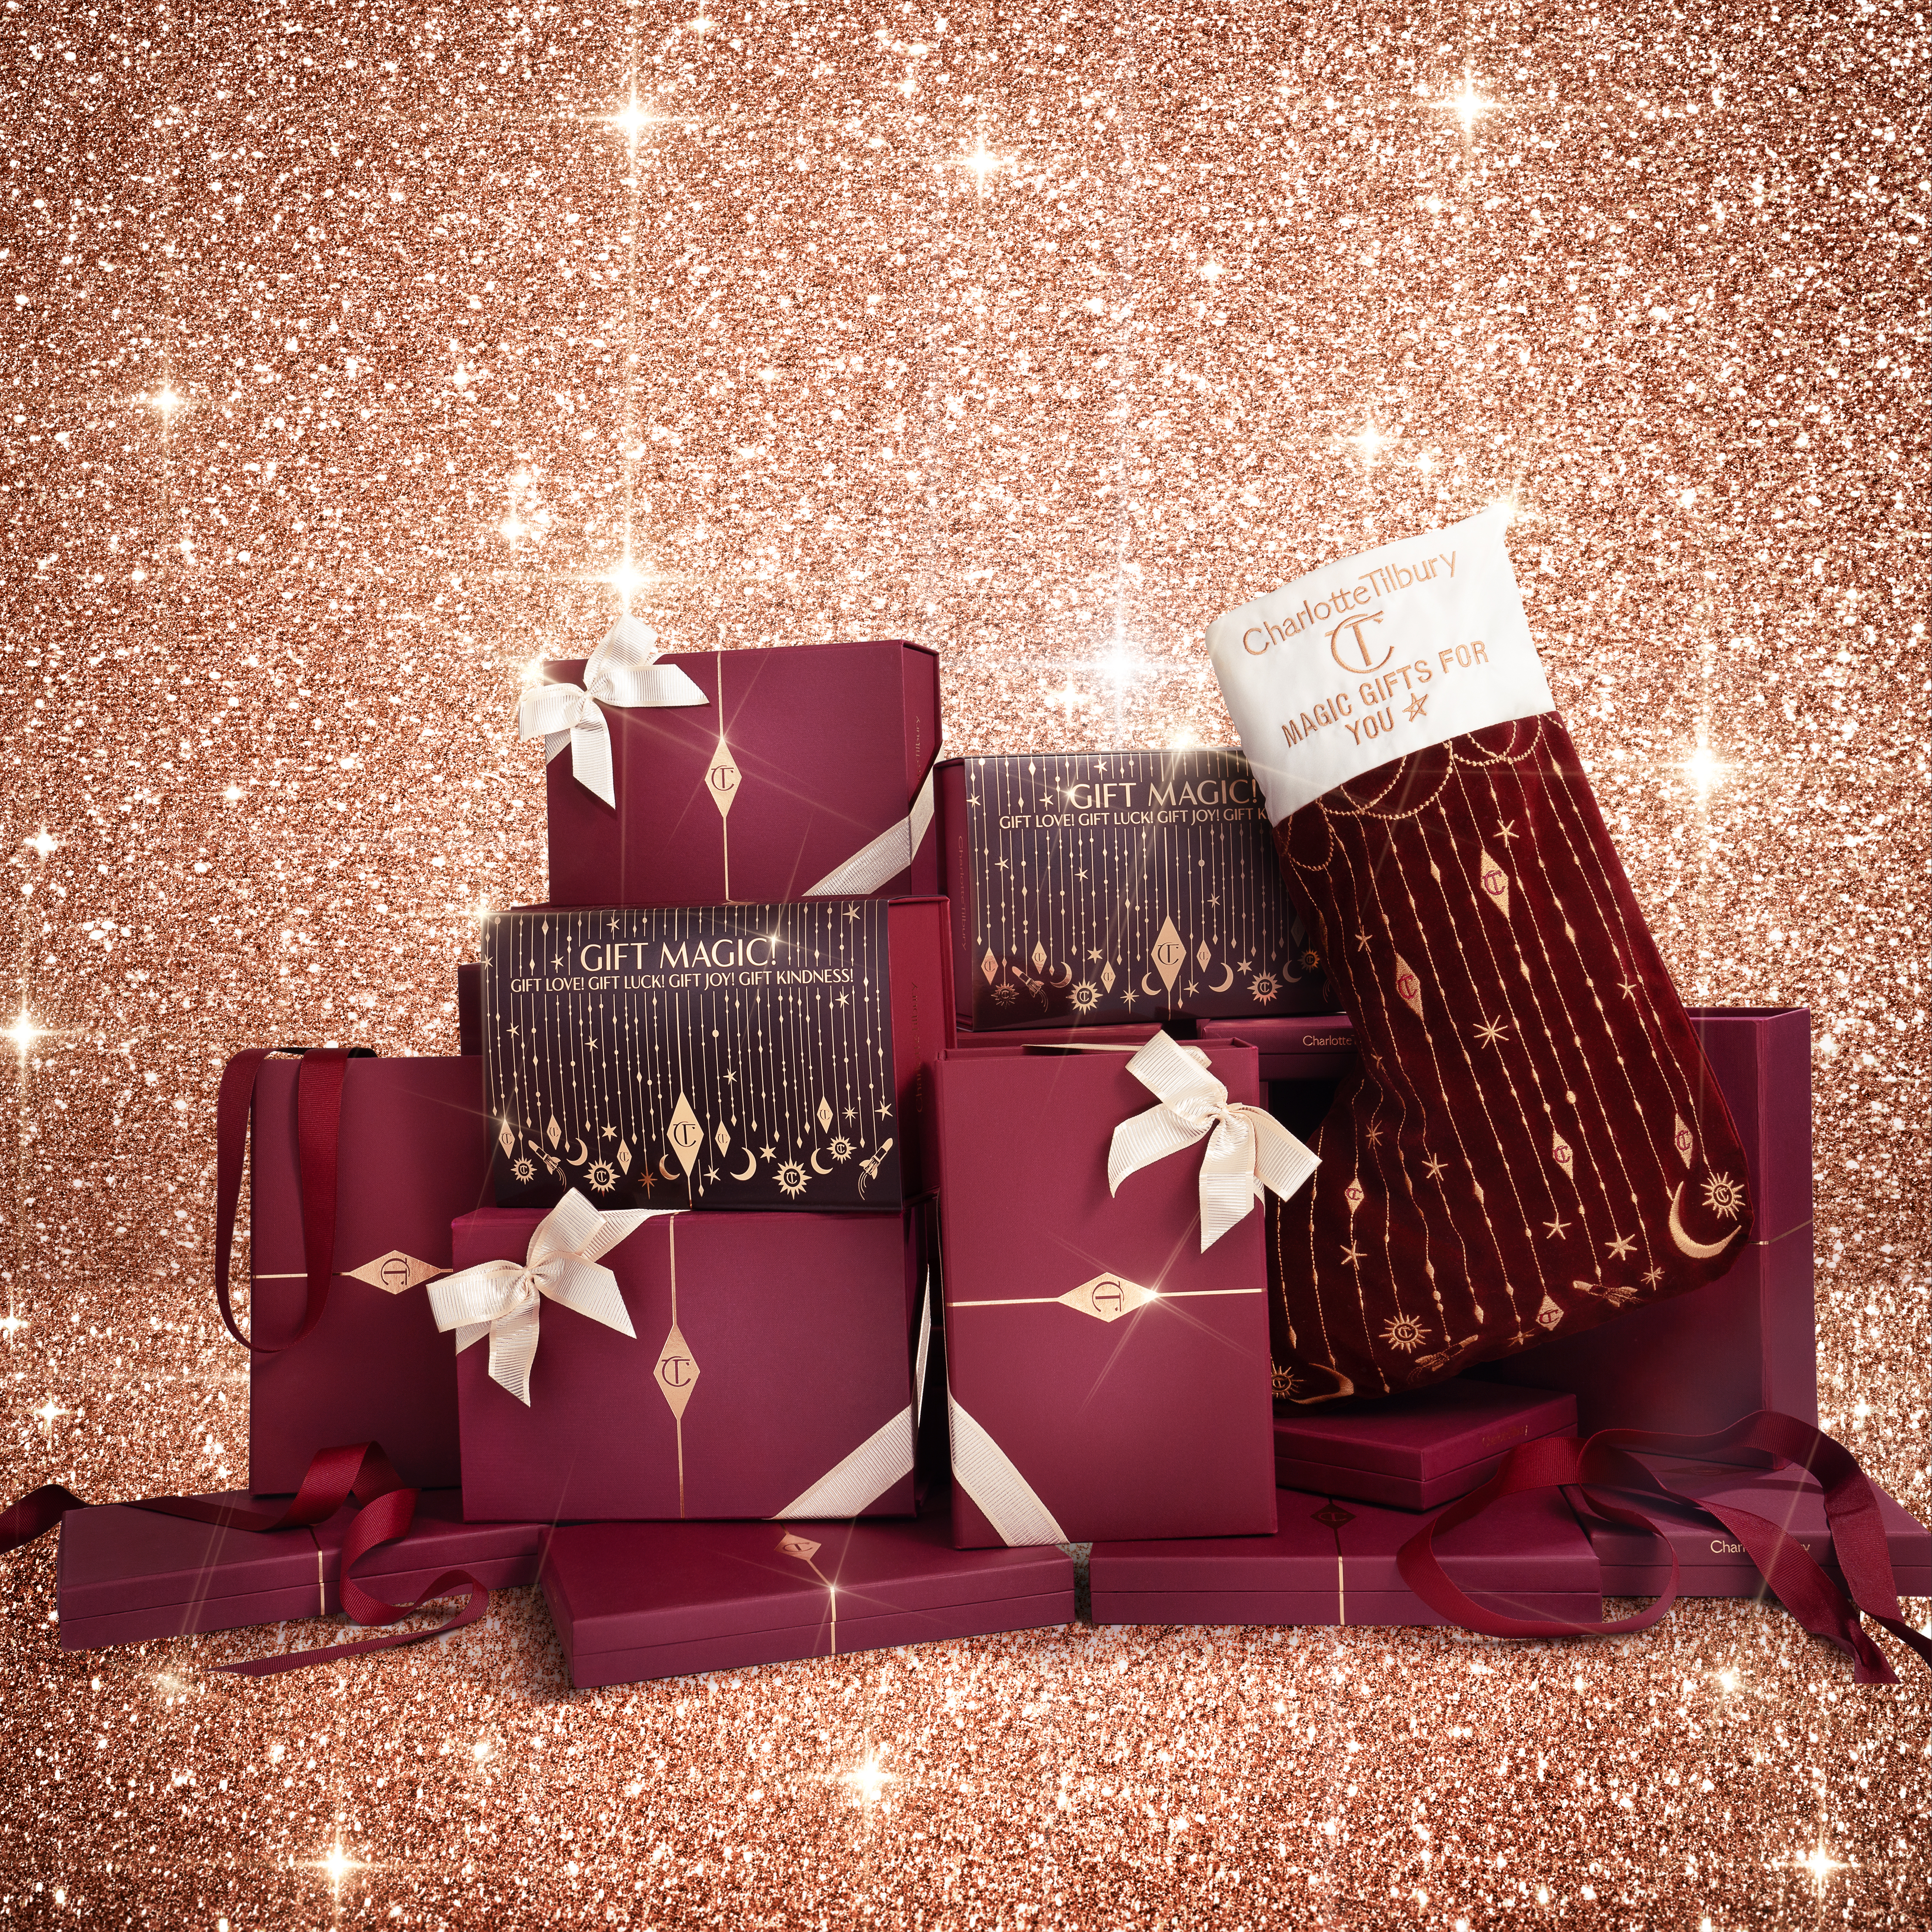 A large pile of gift boxes in maroon and gold with cream-coloured ribbons tied around them and embellished holiday stockings.